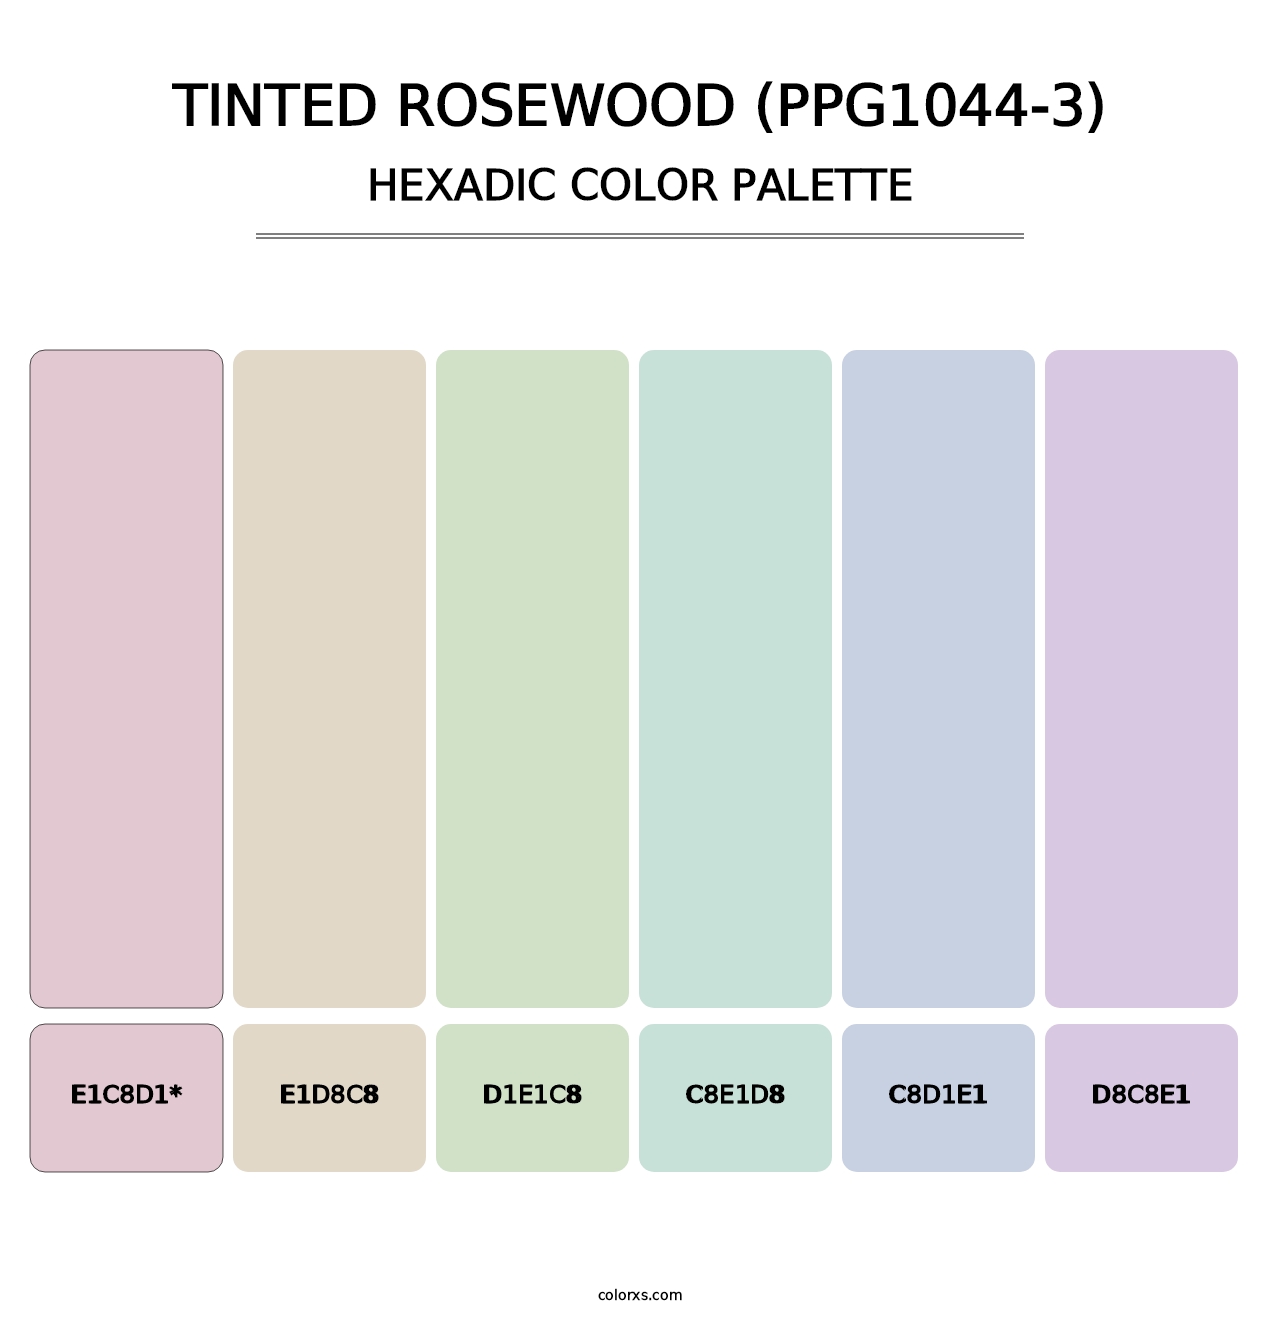 Tinted Rosewood (PPG1044-3) - Hexadic Color Palette